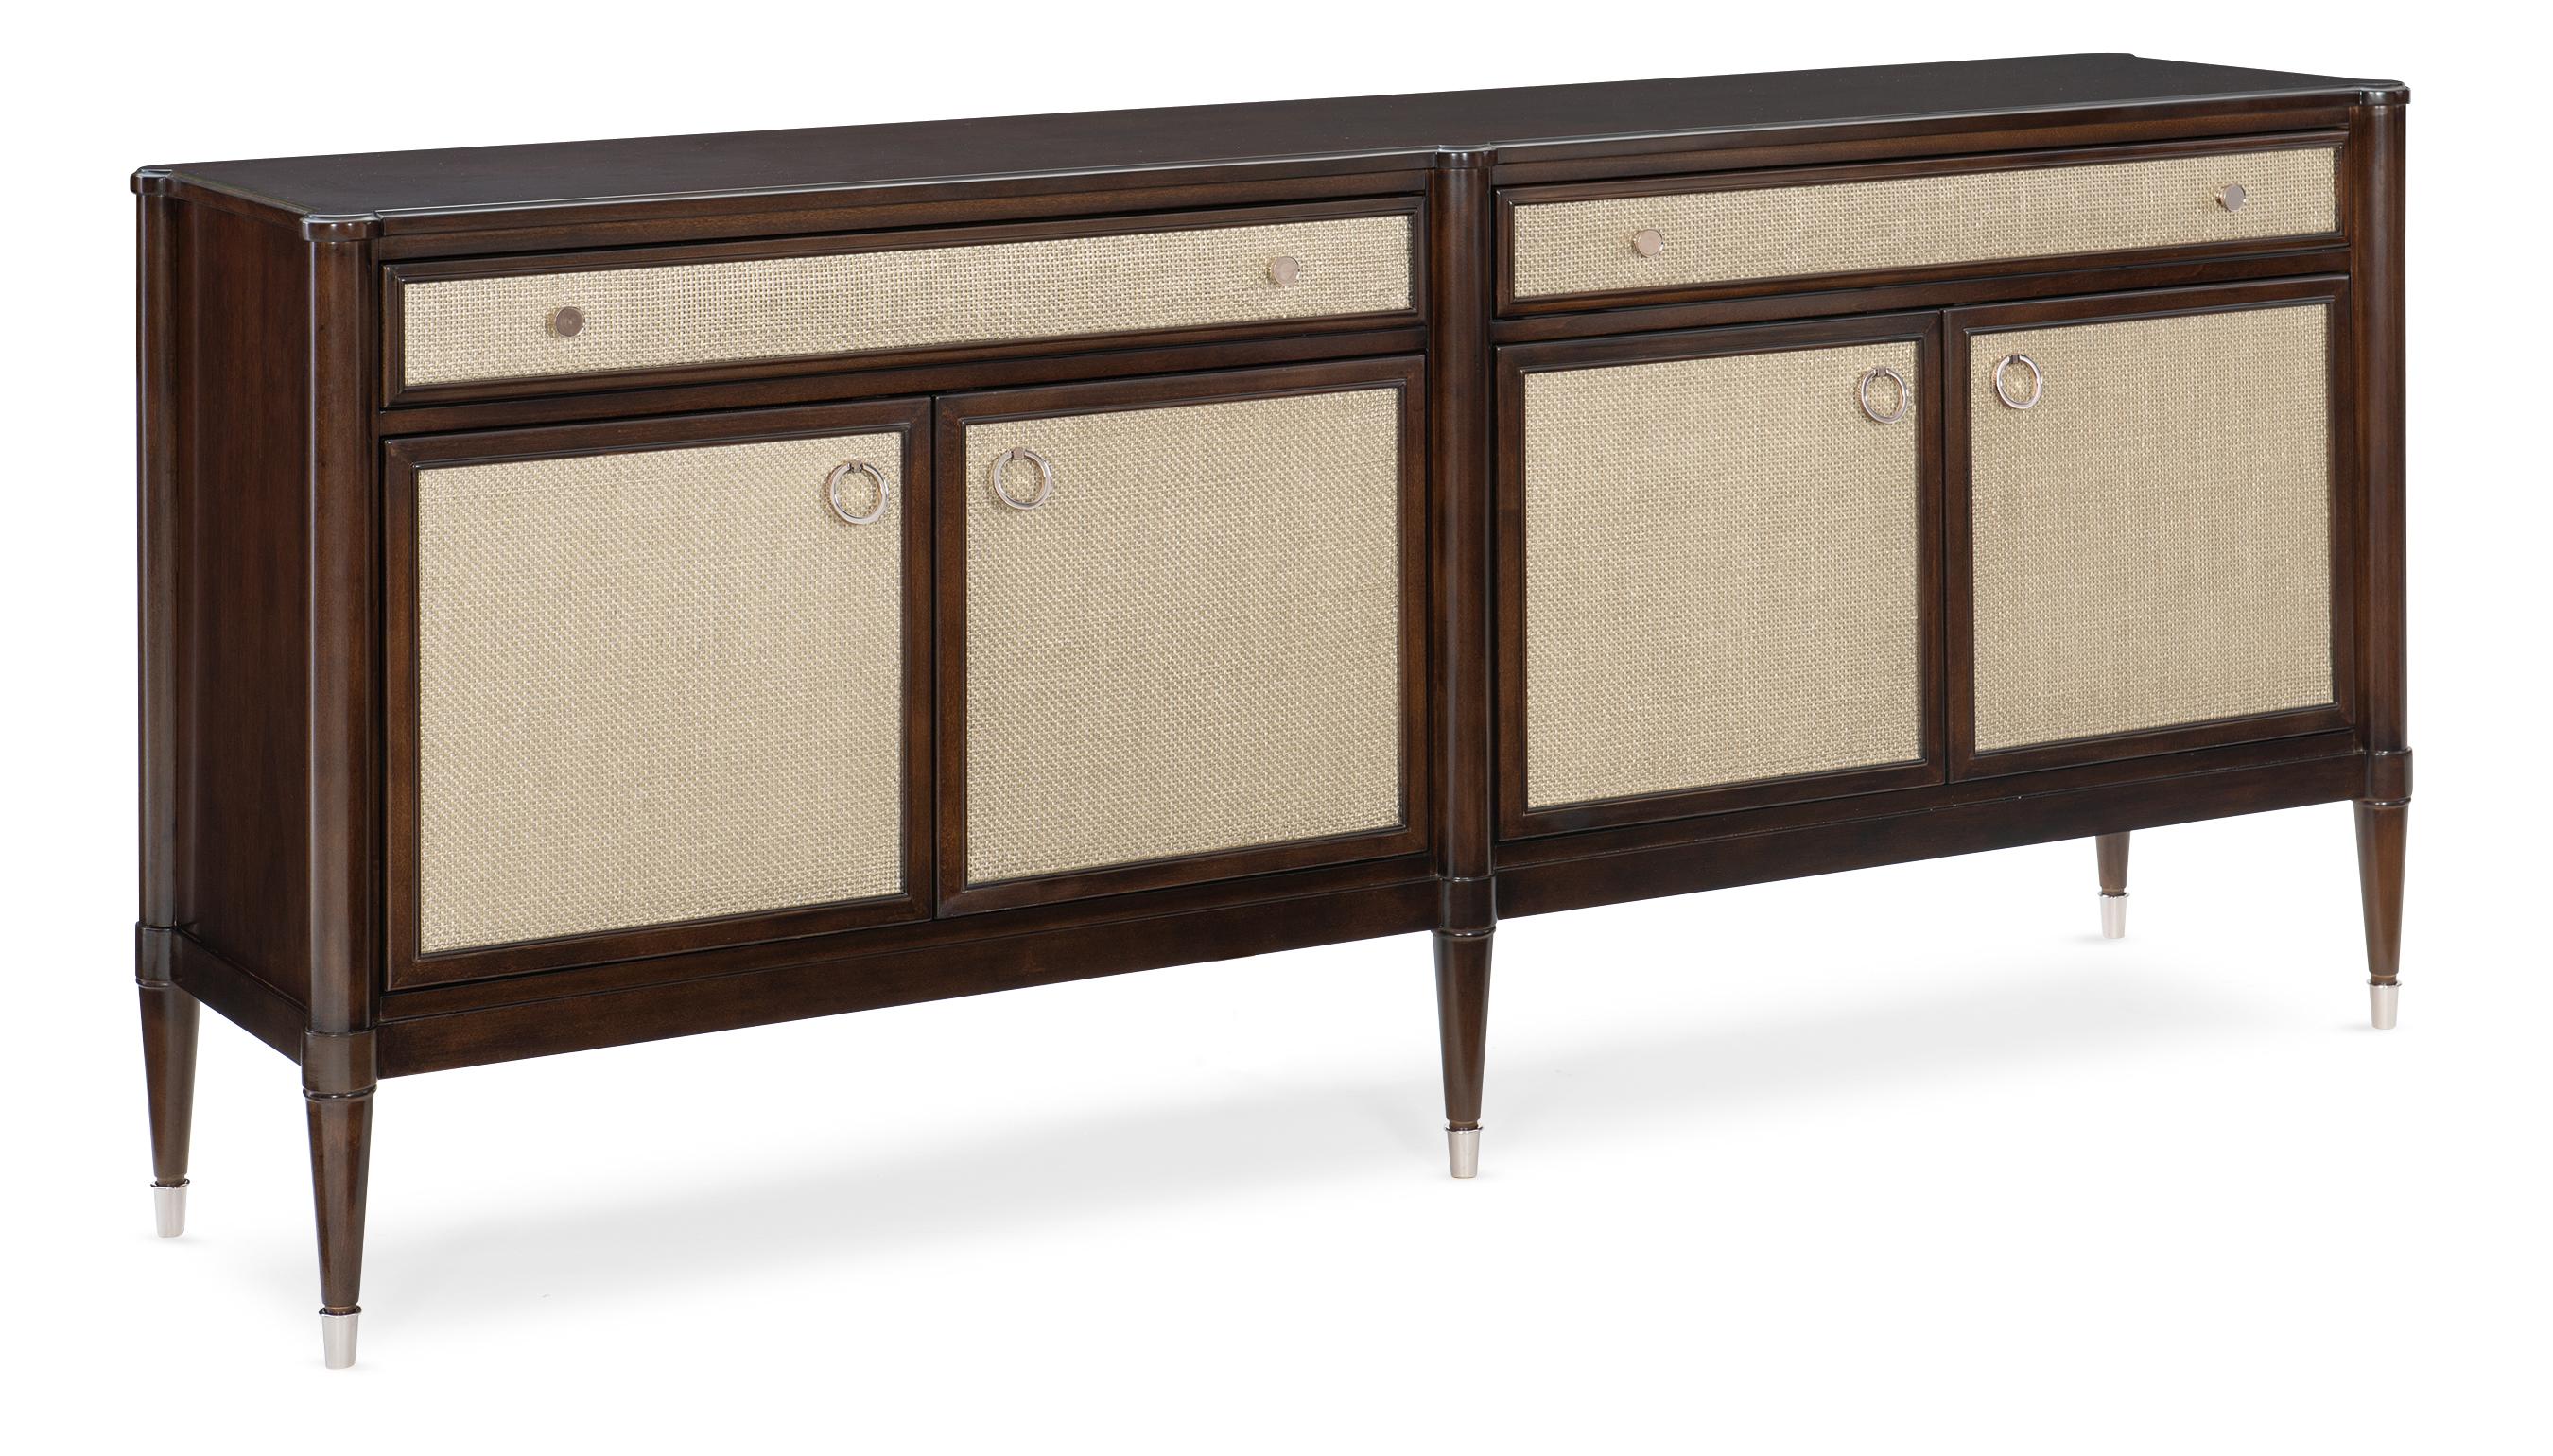 

    
Mocha Walnut Finish Neutral Metallic Painted Cane Buffet  The Silver Screen by Caracole
